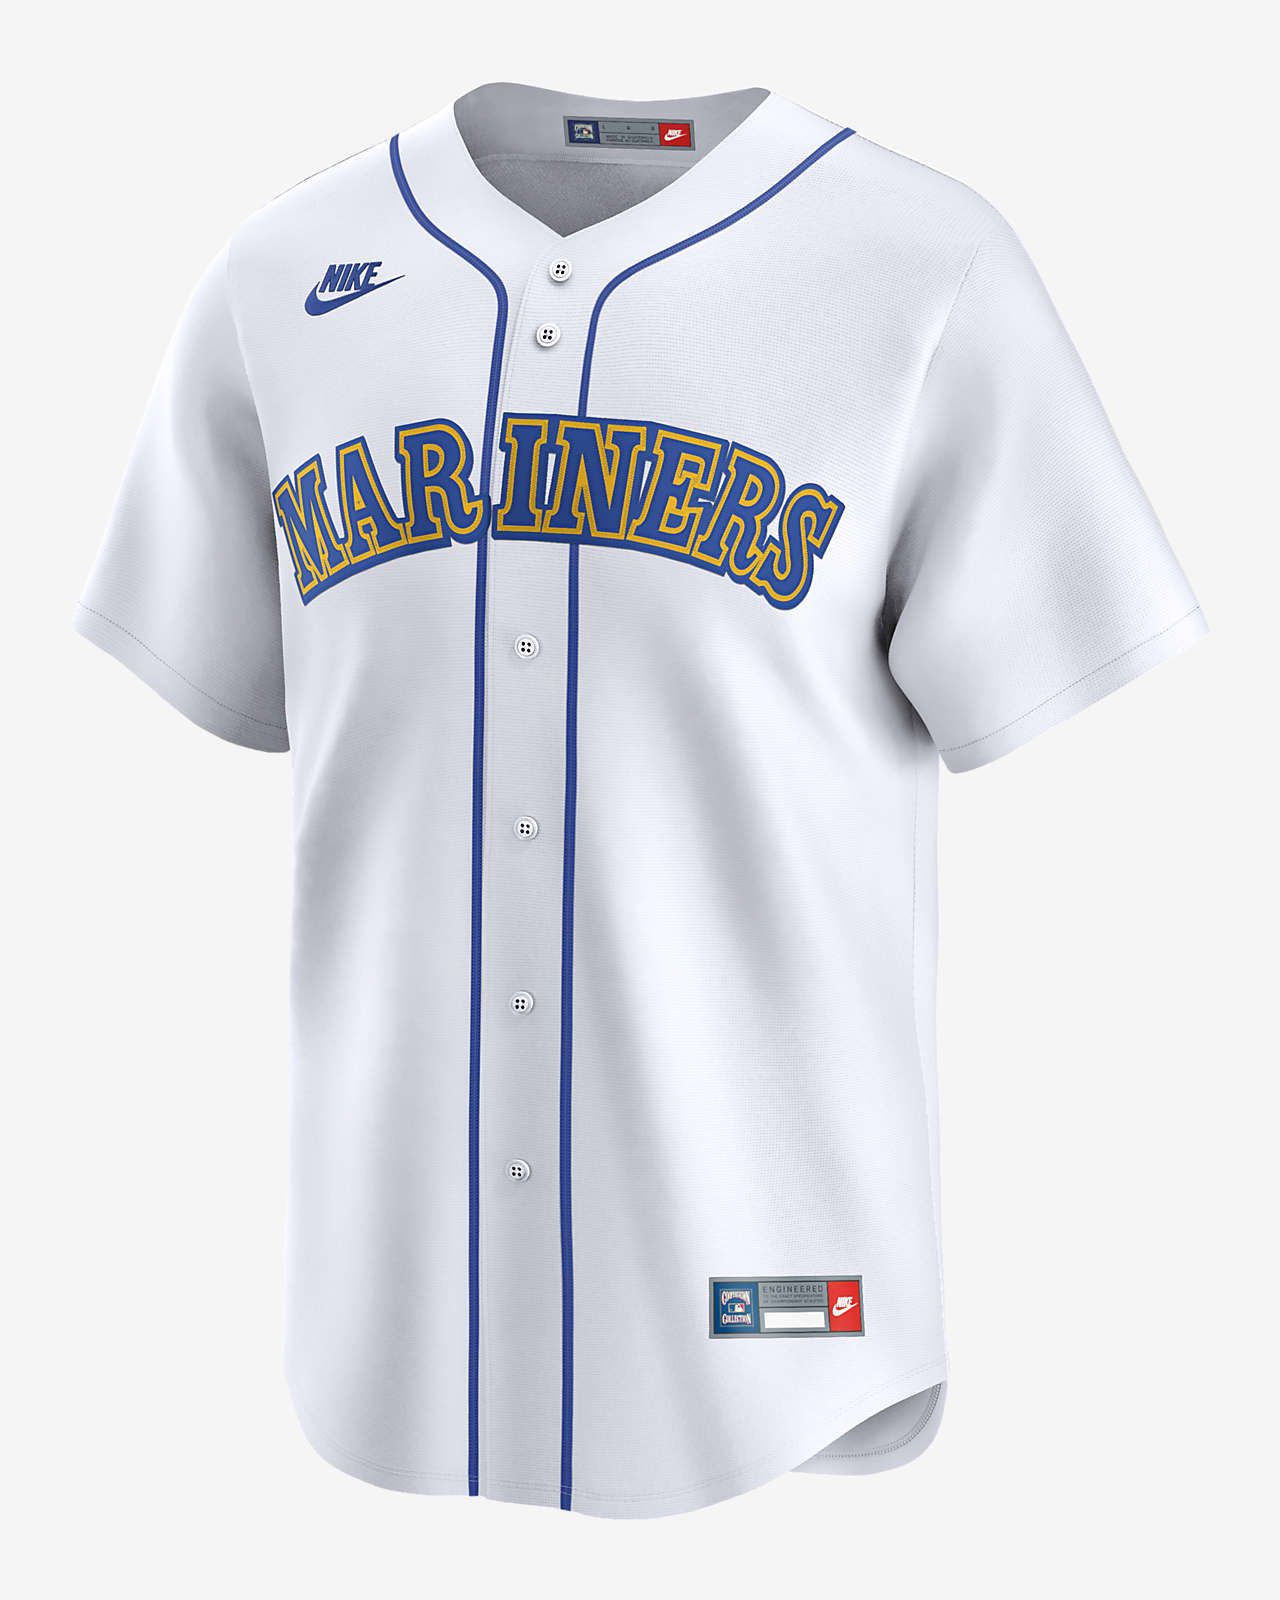 Seattle Mariners Cooperstown Men's Nike Dri-FIT ADV MLB Limited Jersey